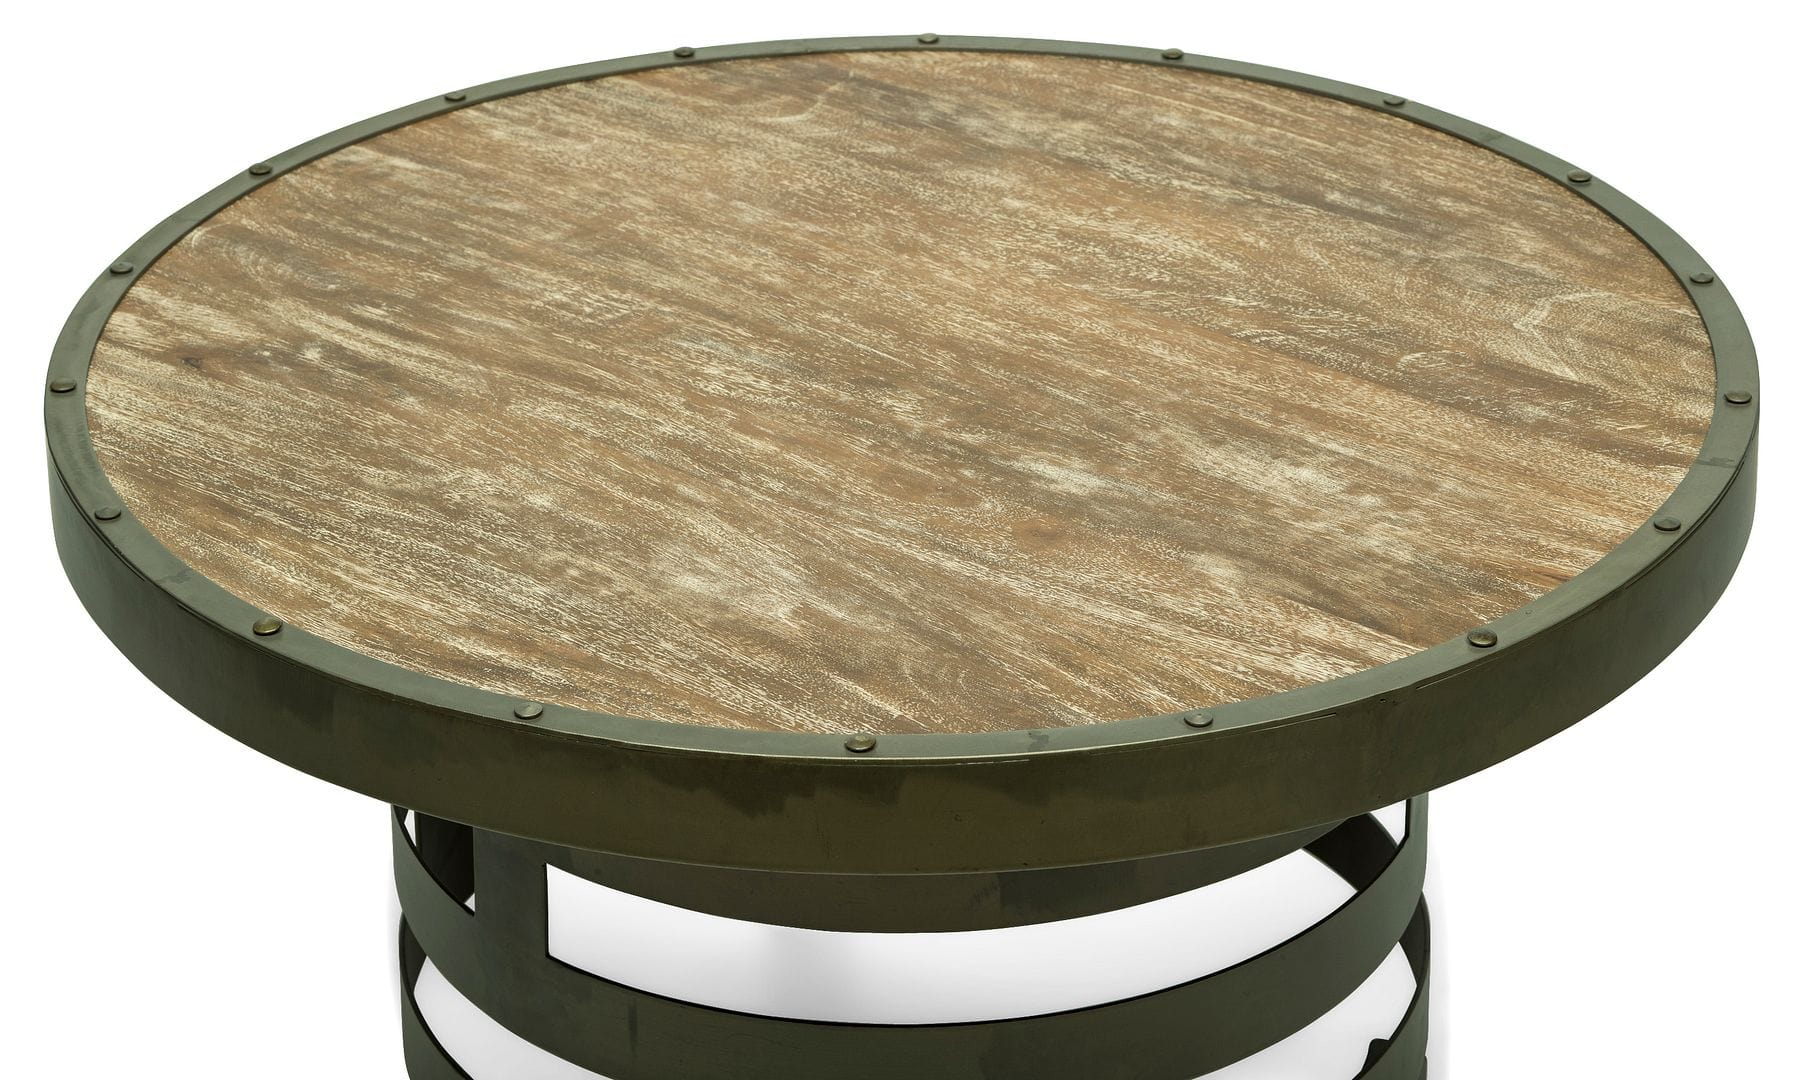 Vintage Spiral Round Coffee Table with Wooden Top - Retro Style